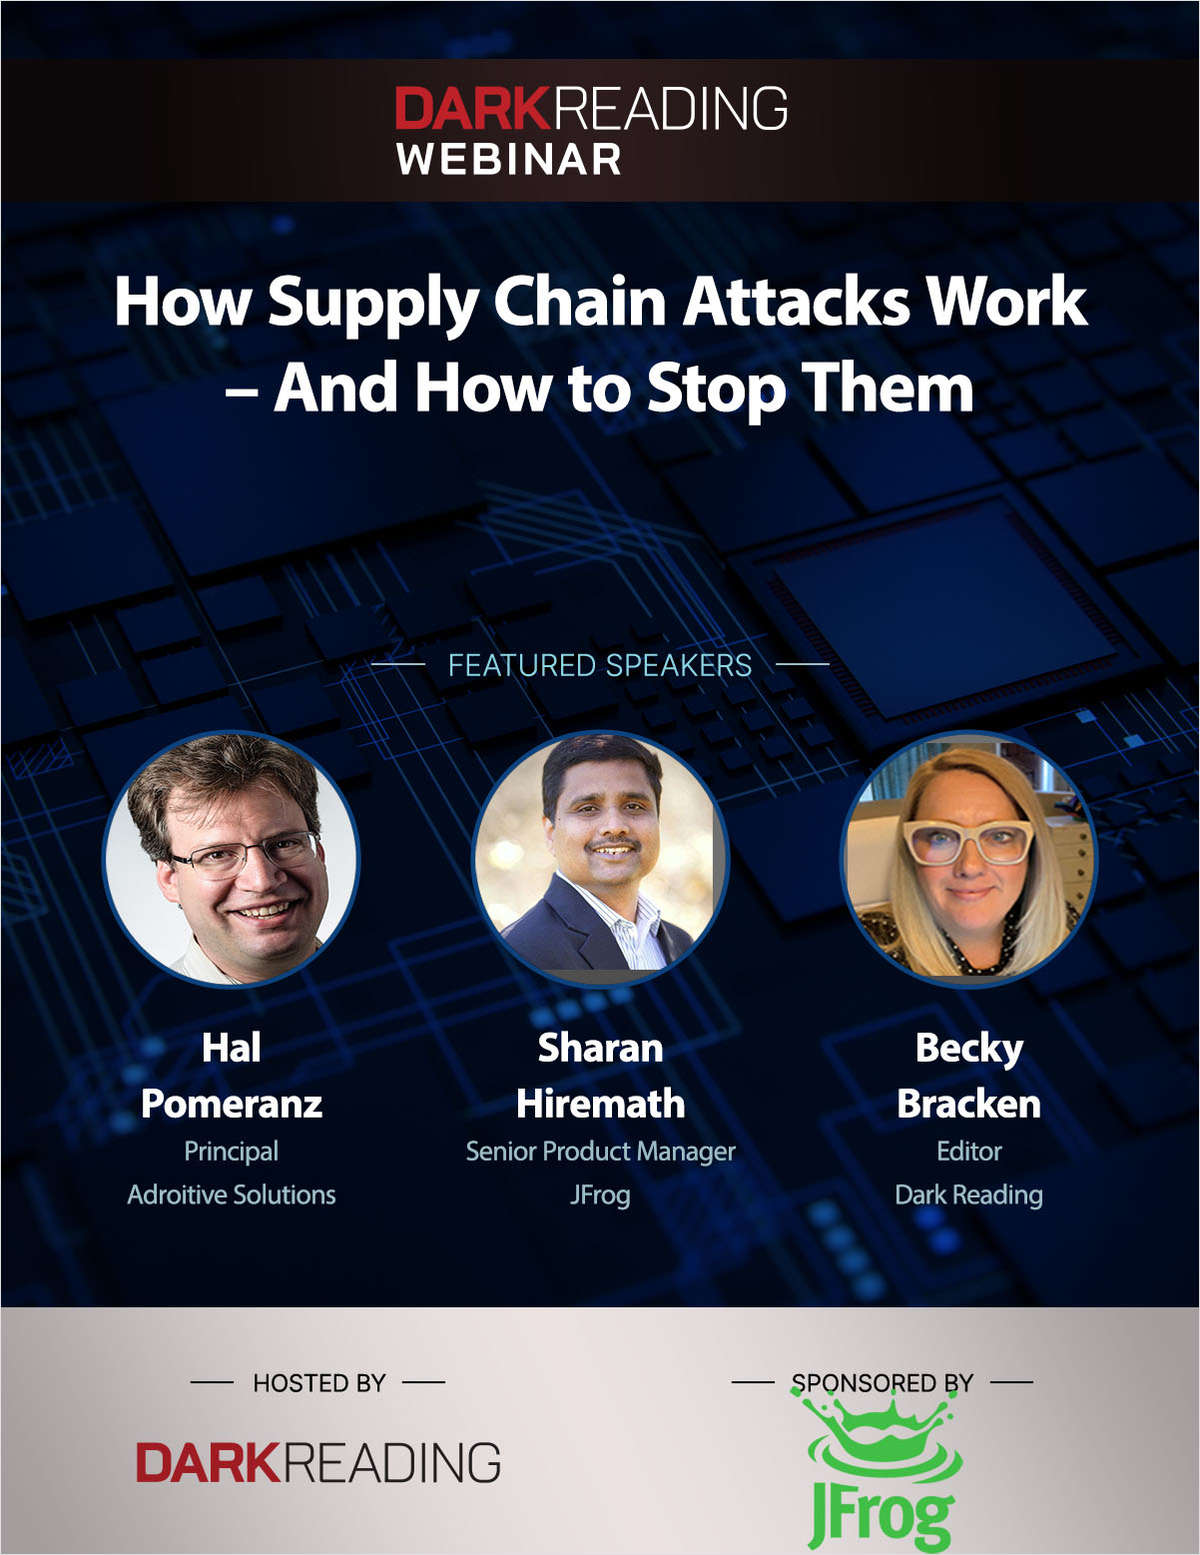 How Supply Chain Attacks Work -- And How to Stop Them